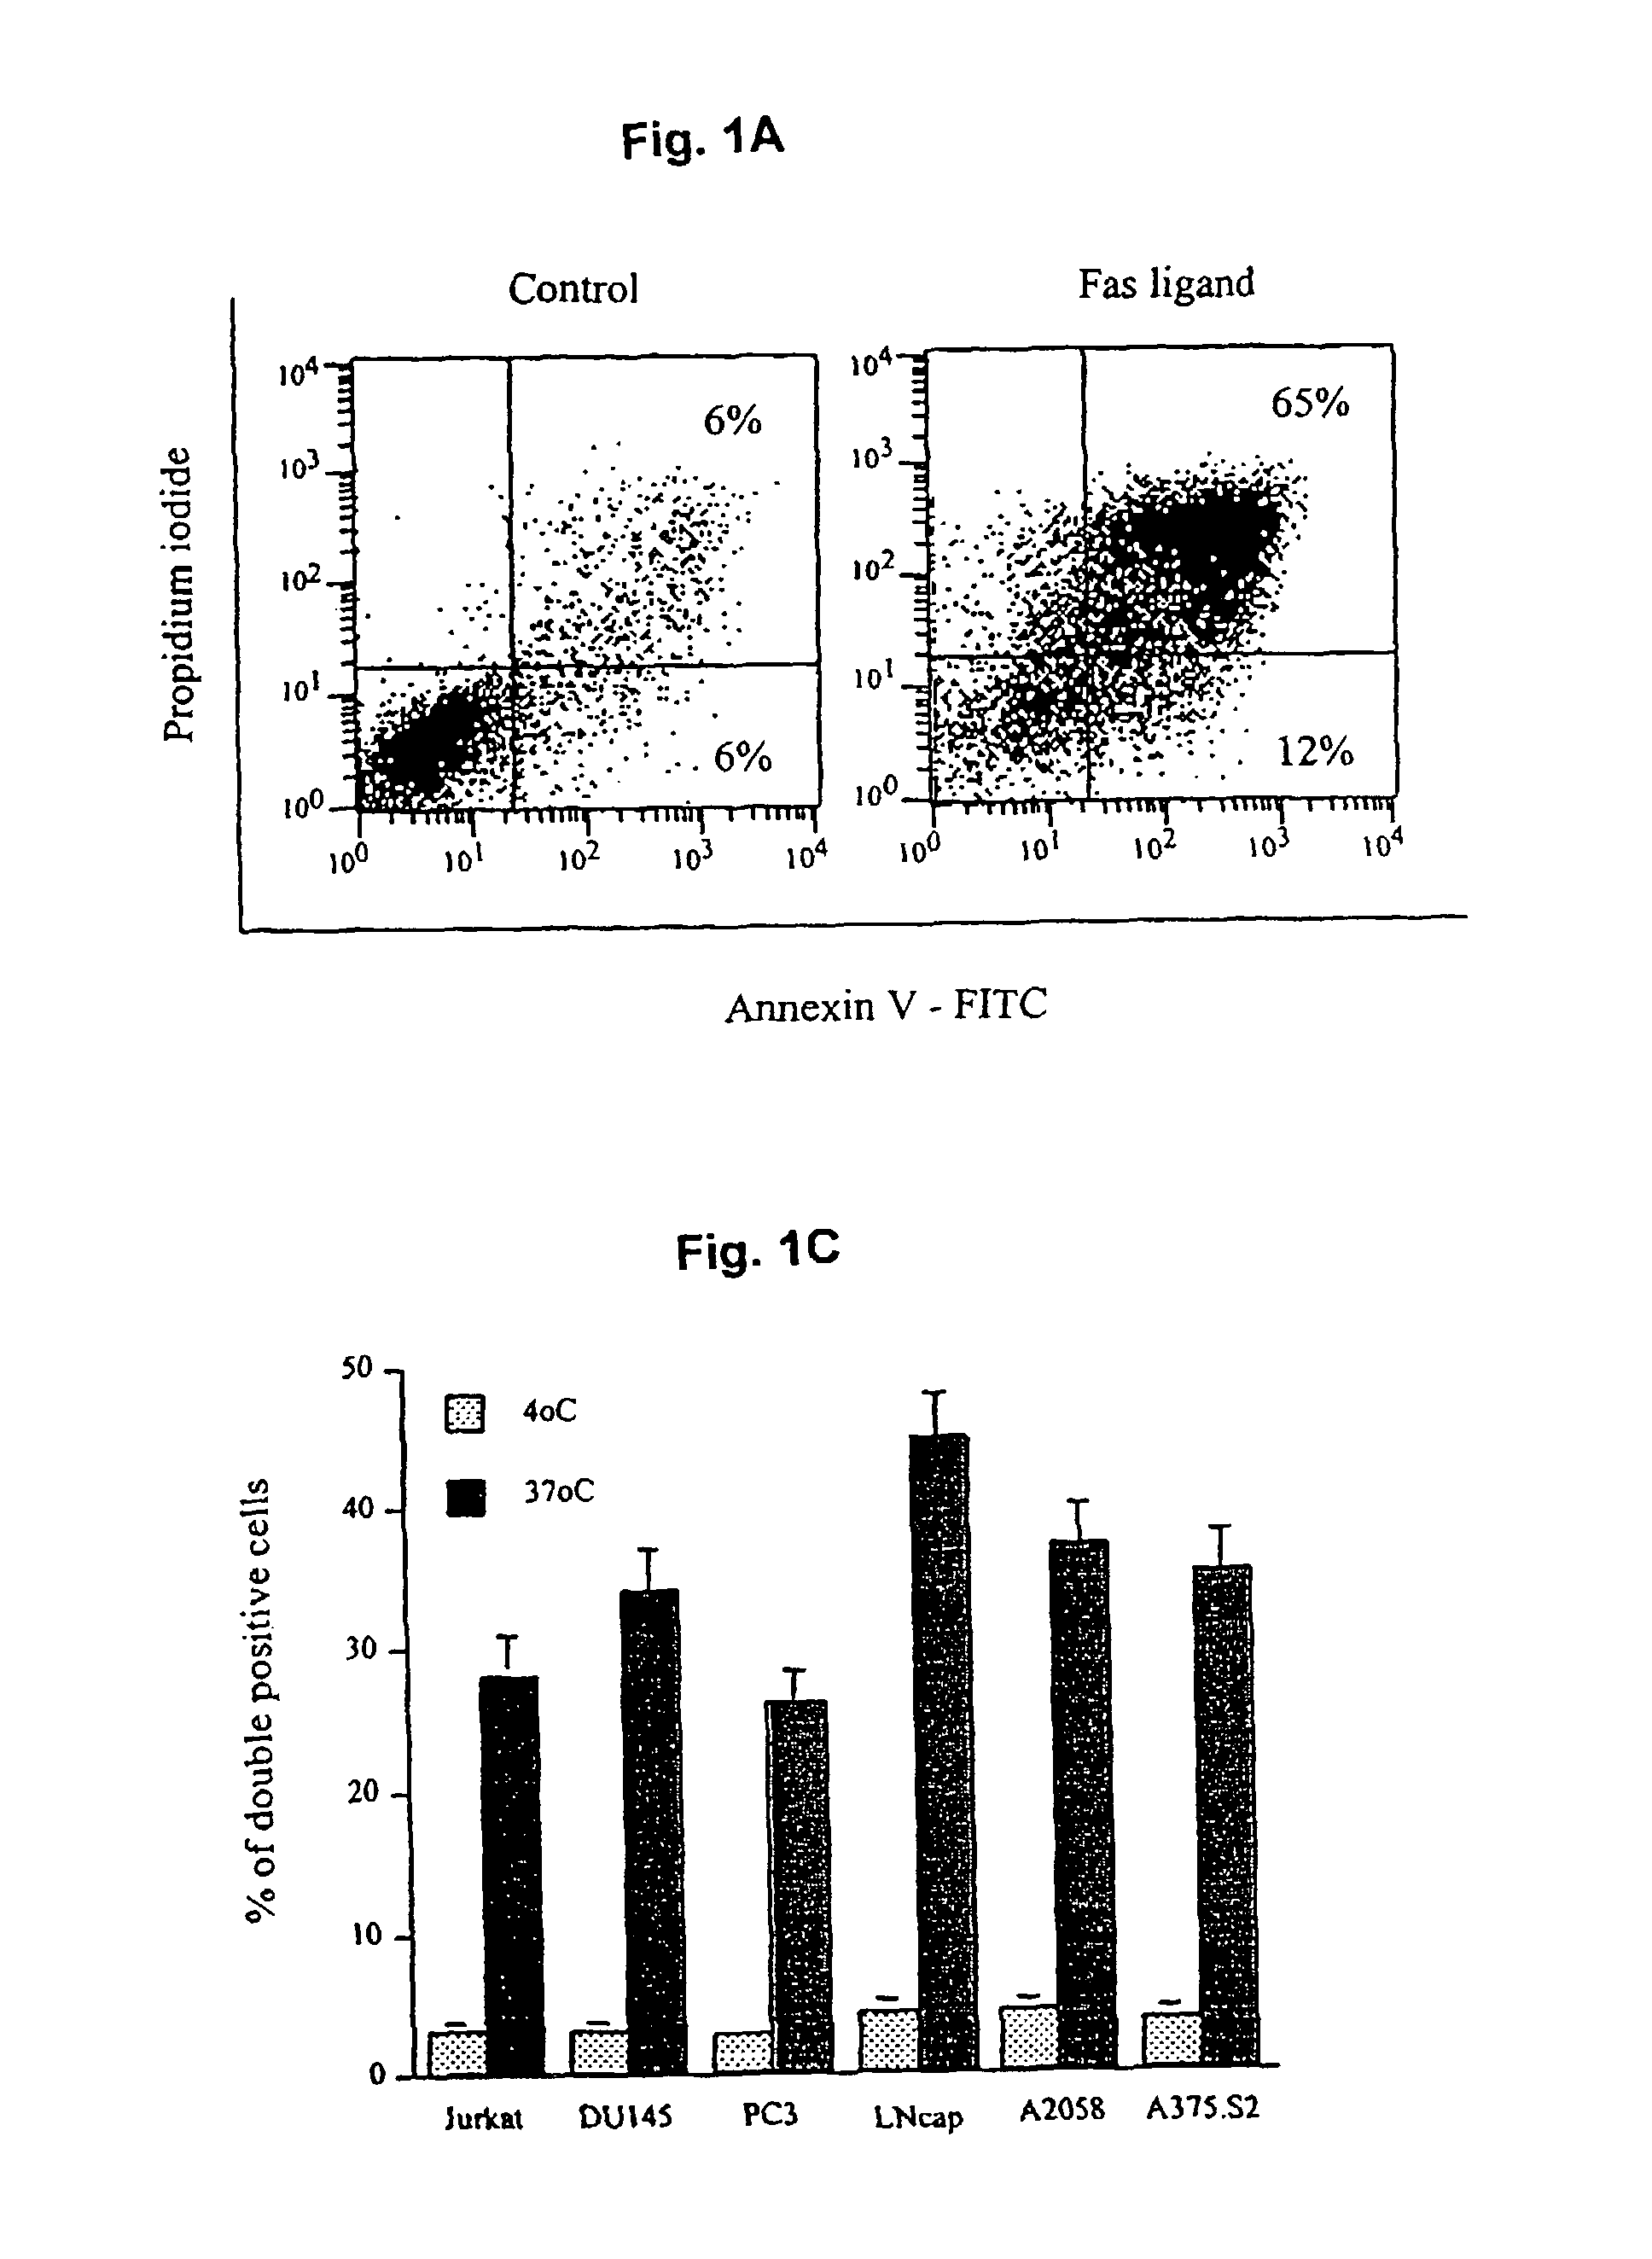 Use of allogeneic cell lines to load antigen presenting cells to elicit or eliminate immune responses